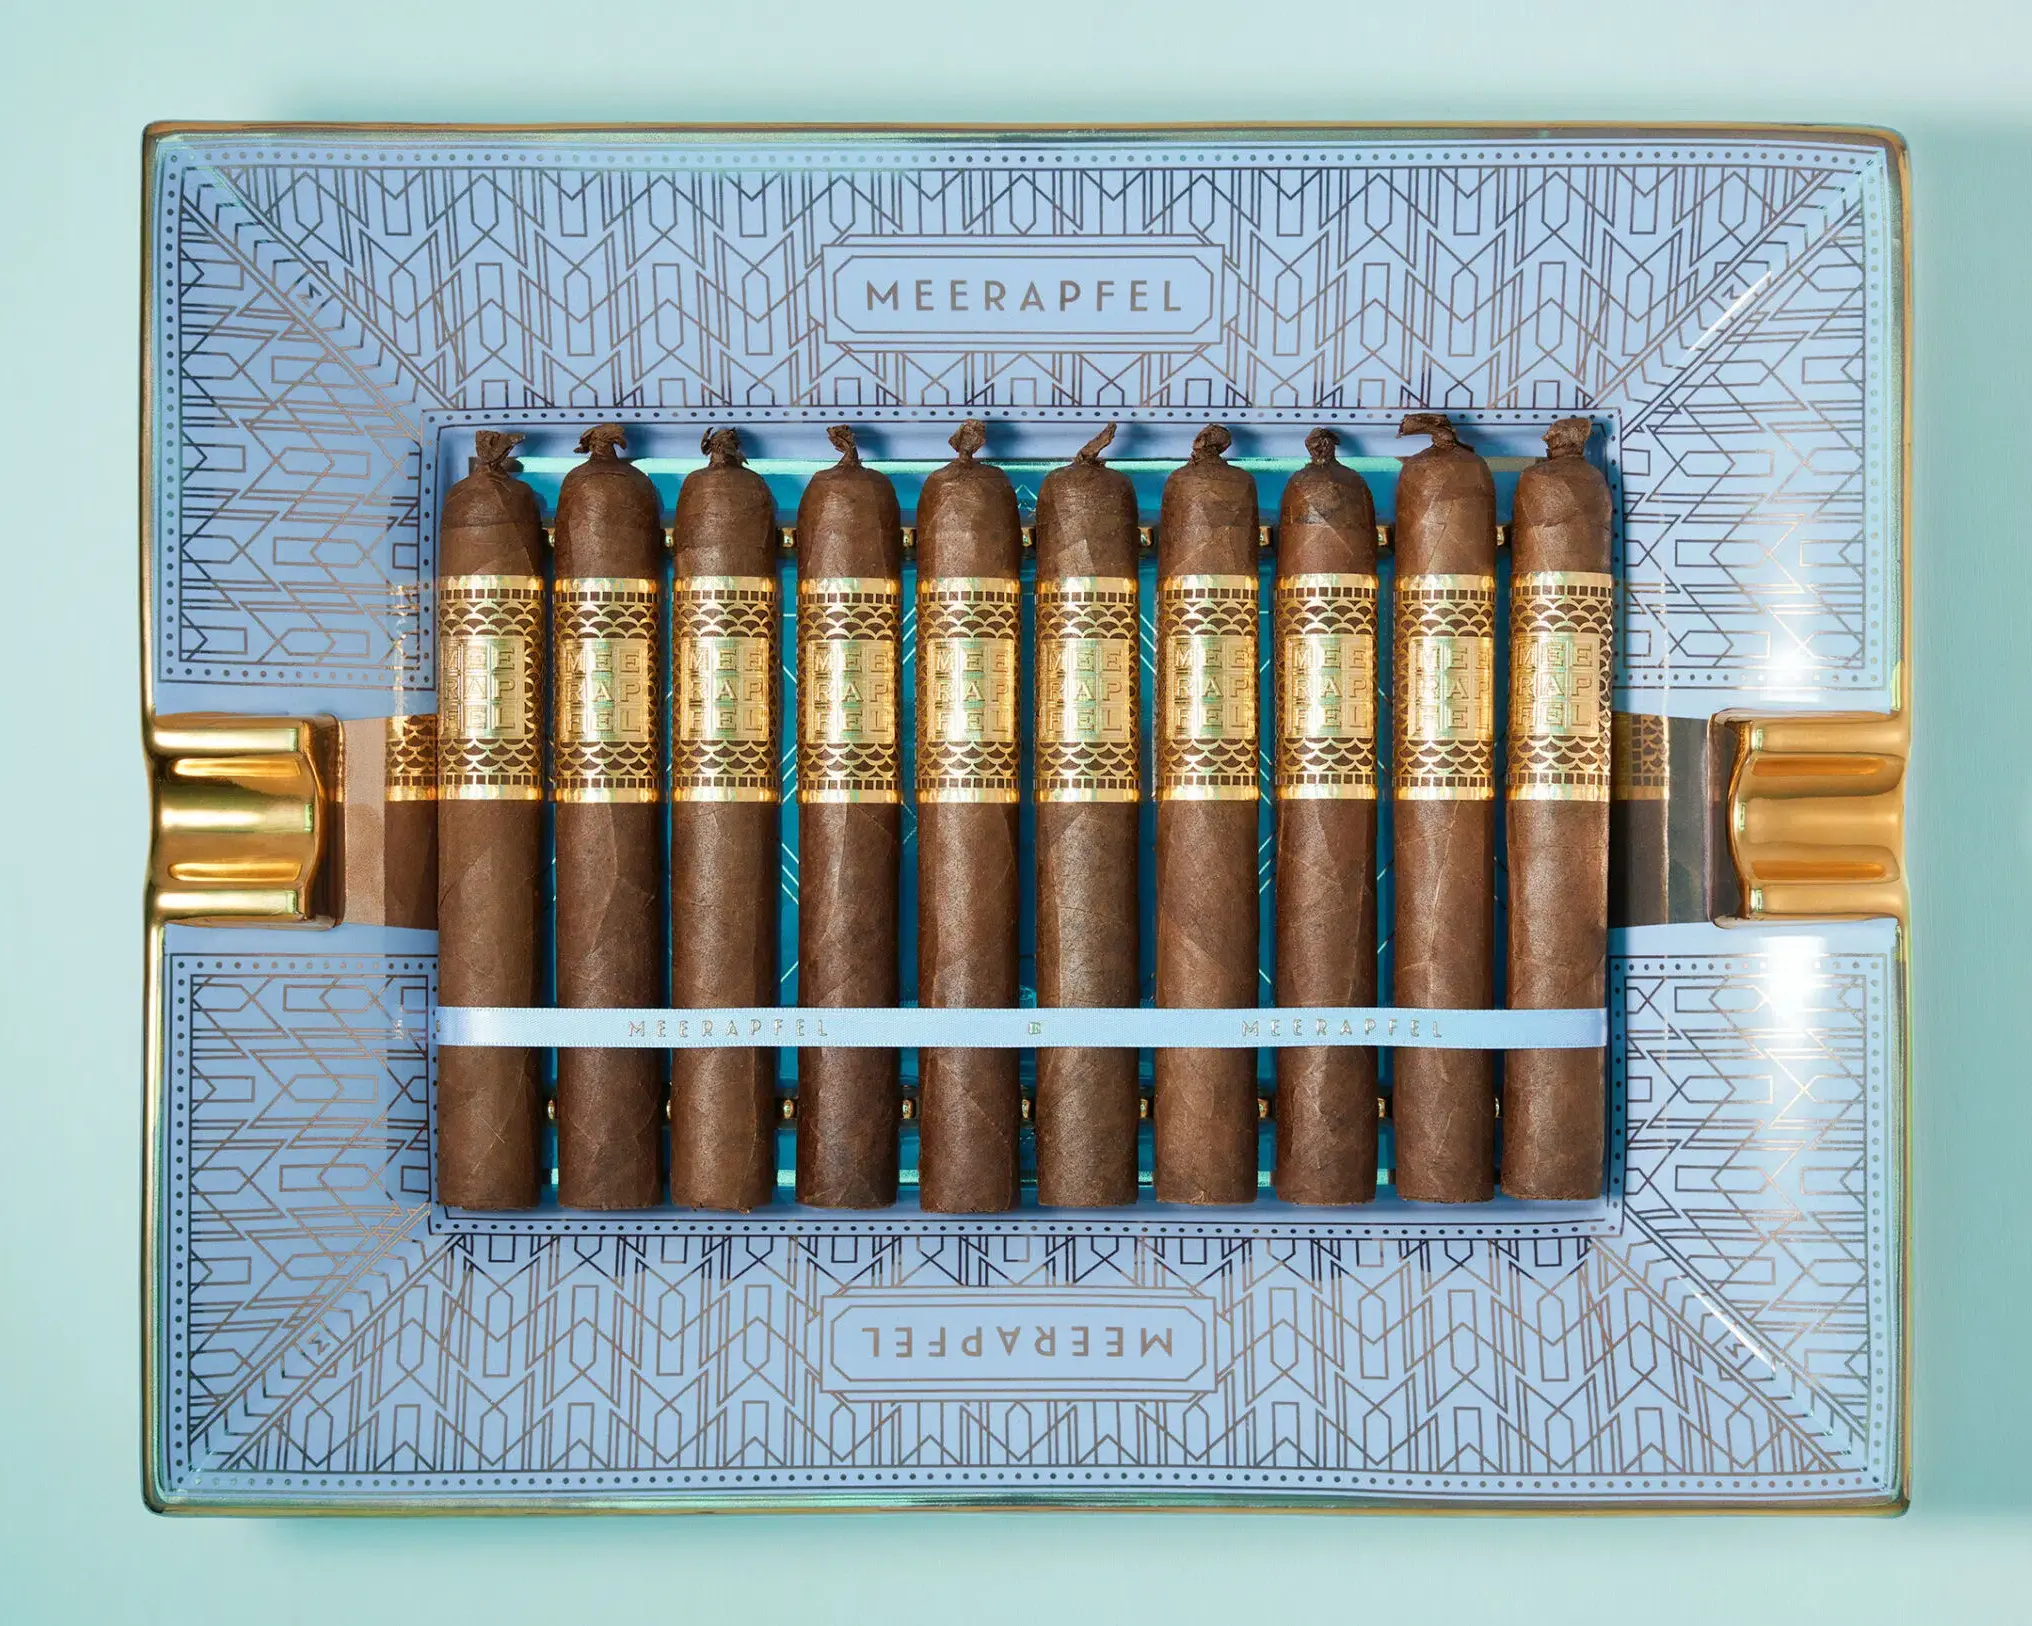 Meerapfel Cigar Launches “Meir” with Four New Vitolas